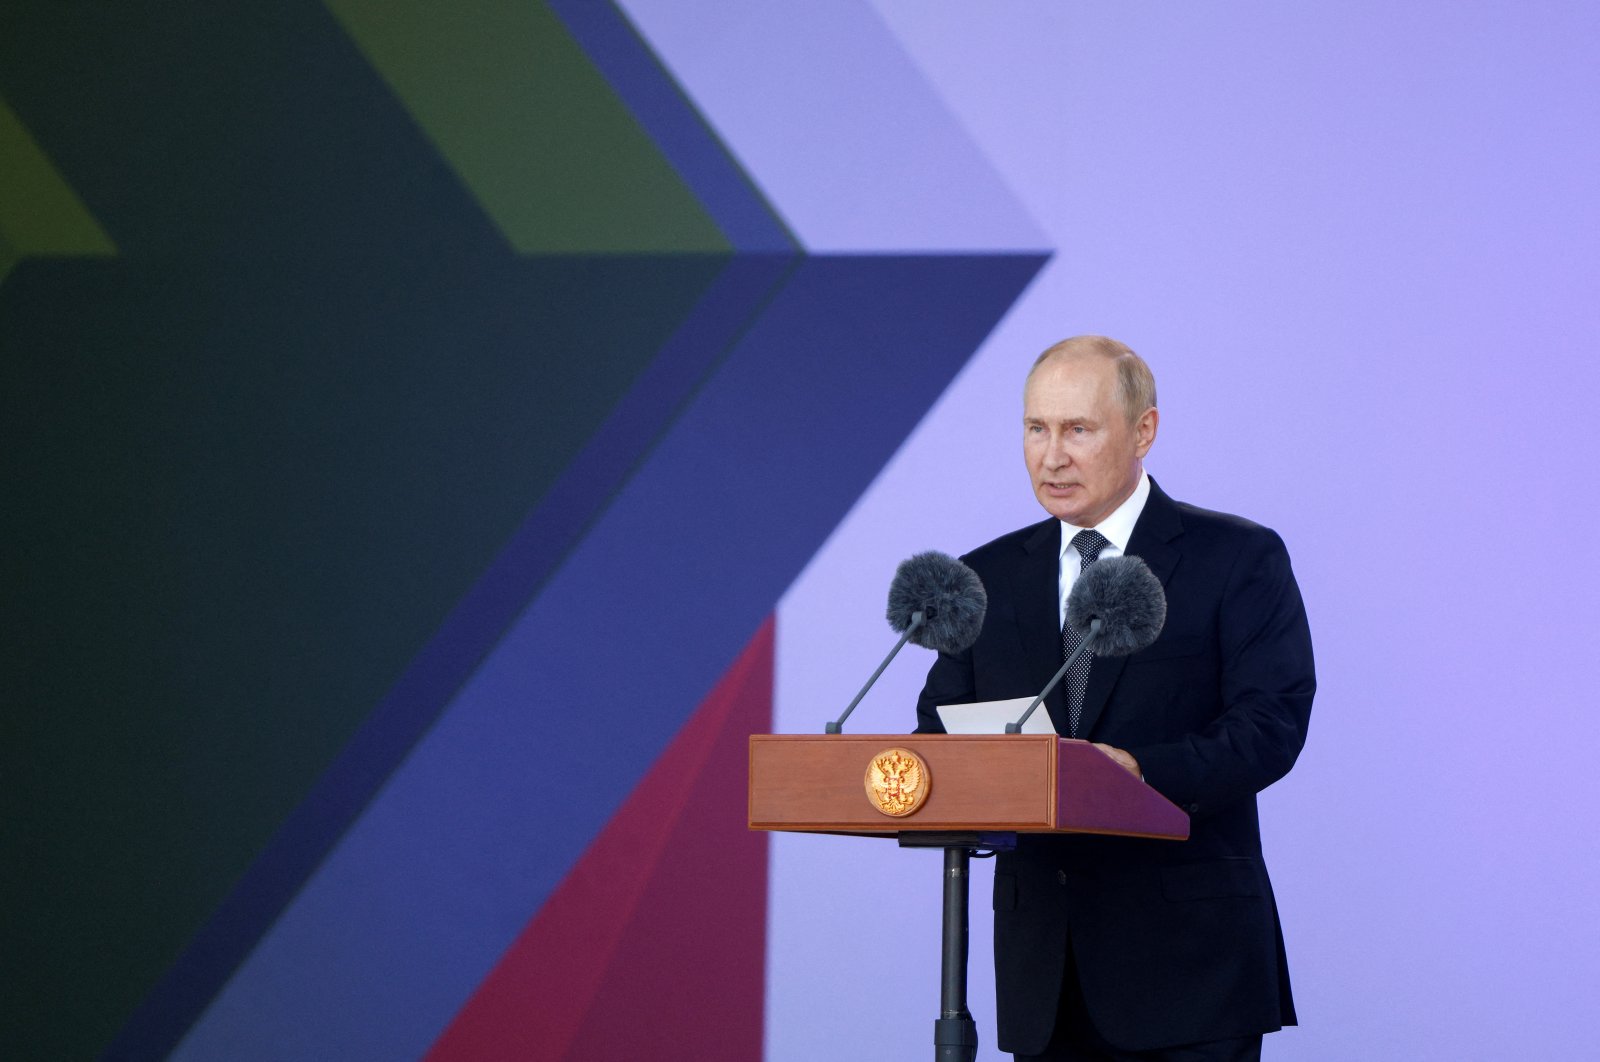 Russian President Vladimir Putin delivers a speech during a ceremony opening the international military-technical forum Army-2022, in Moscow, Russia, Aug. 15, 2022. (Reuters Photo)